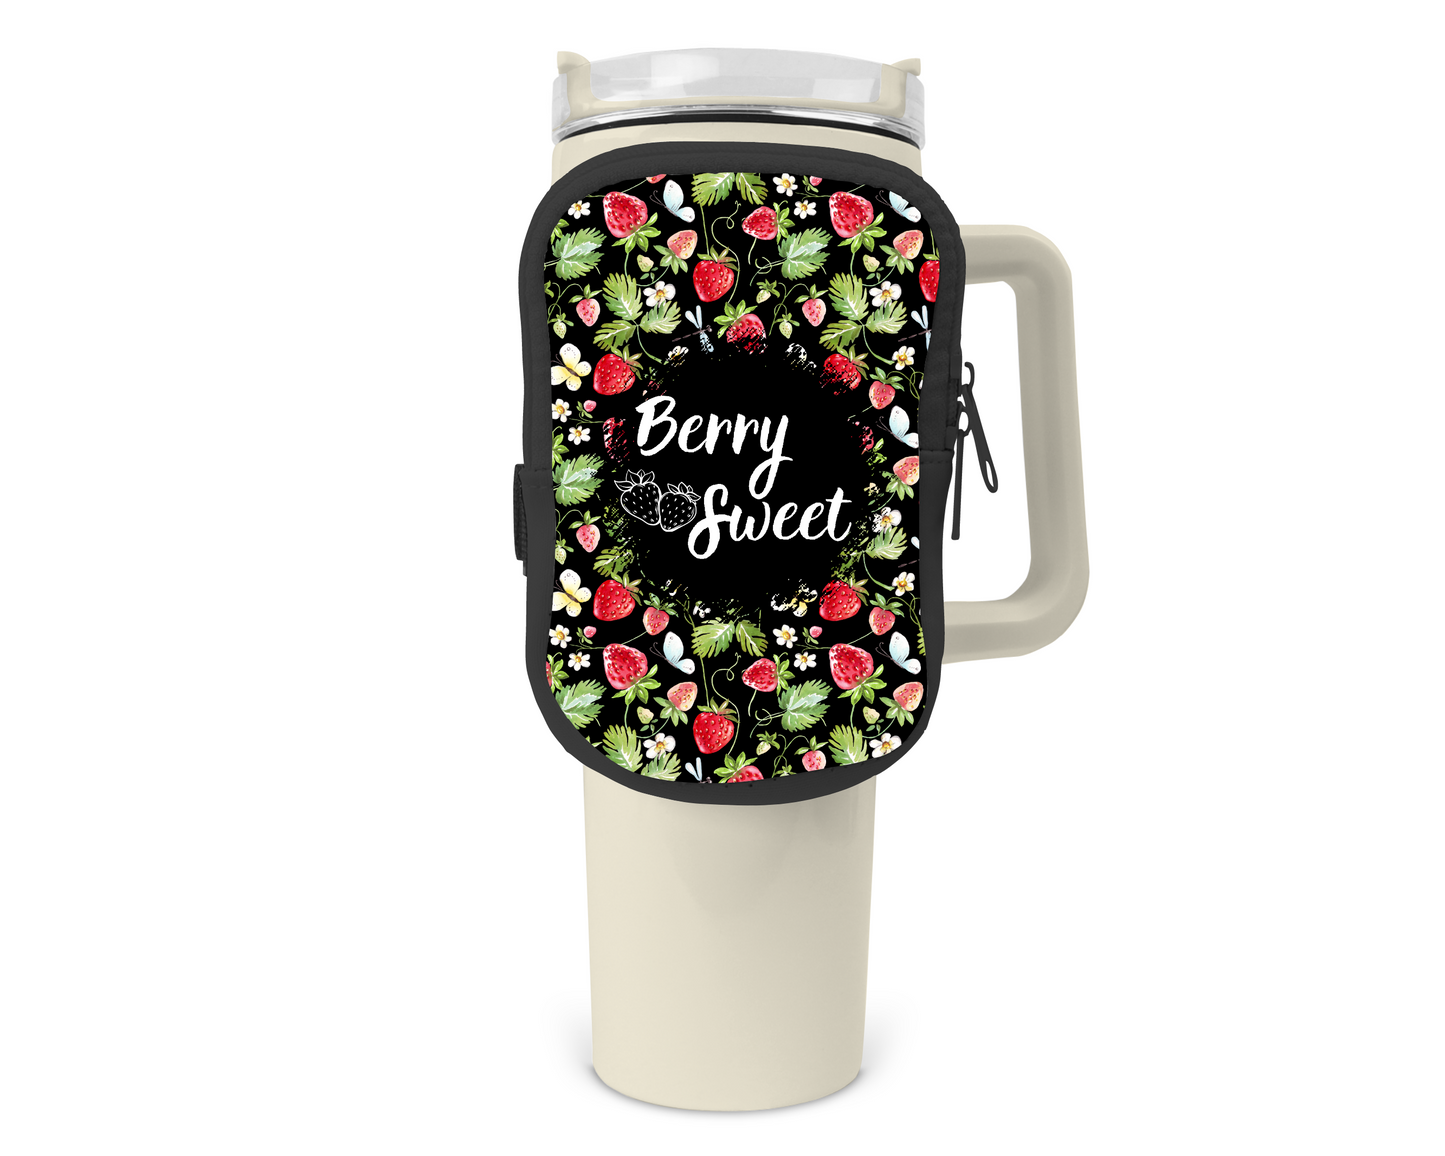 Berry Sweet Zippered Pouch/Bag For 40oz Tumbler (Bag Only)